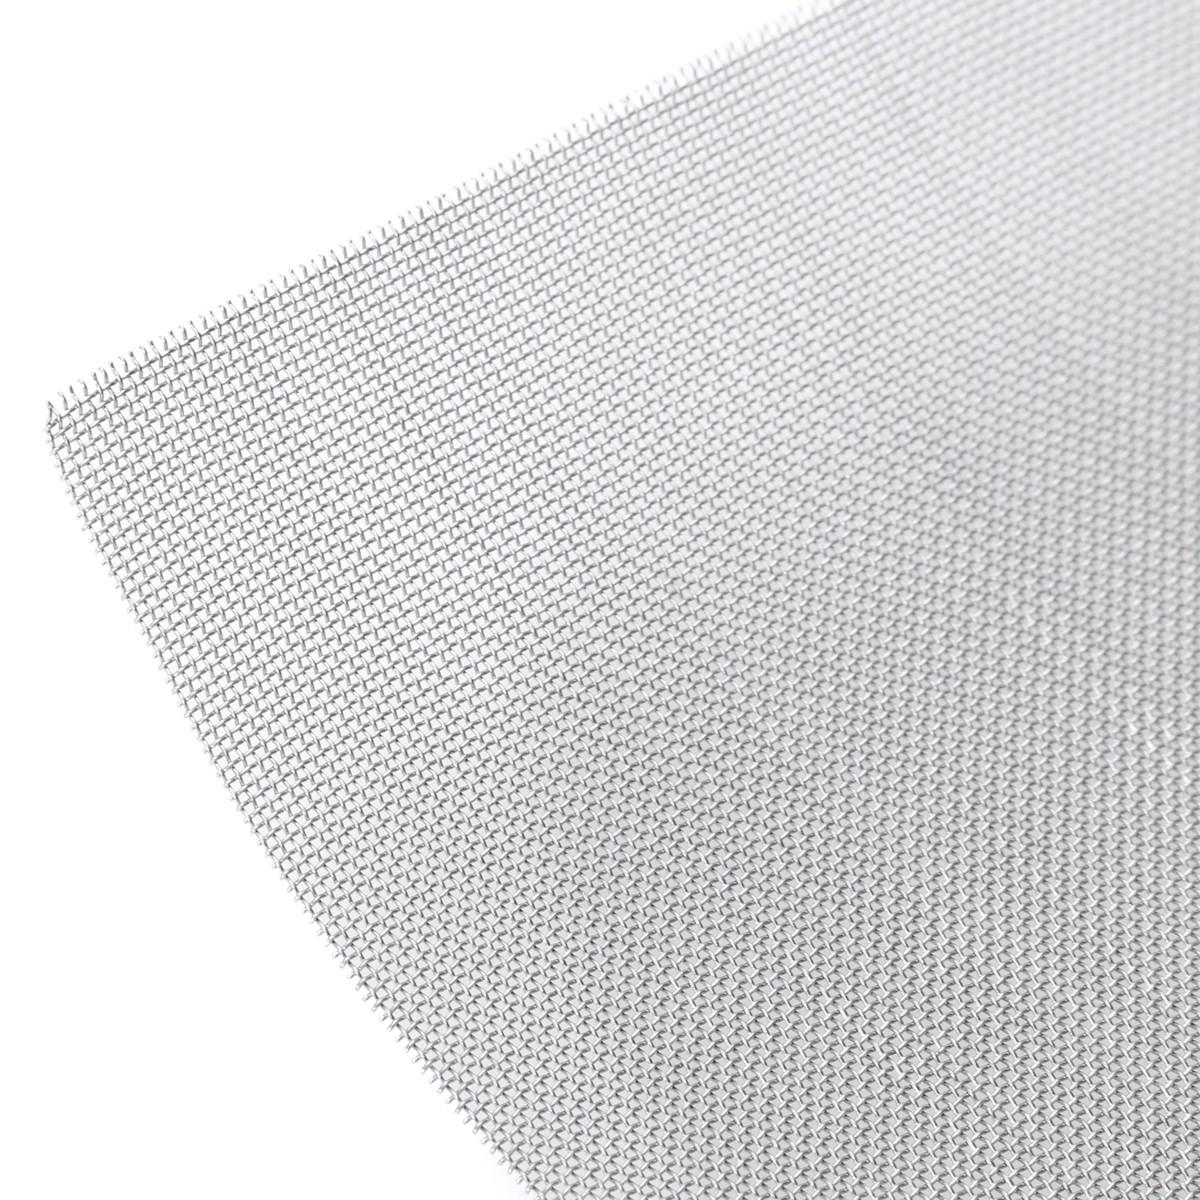 Stainless Steel 316 Mesh #40 .010 Wire Screen 6"x36" 